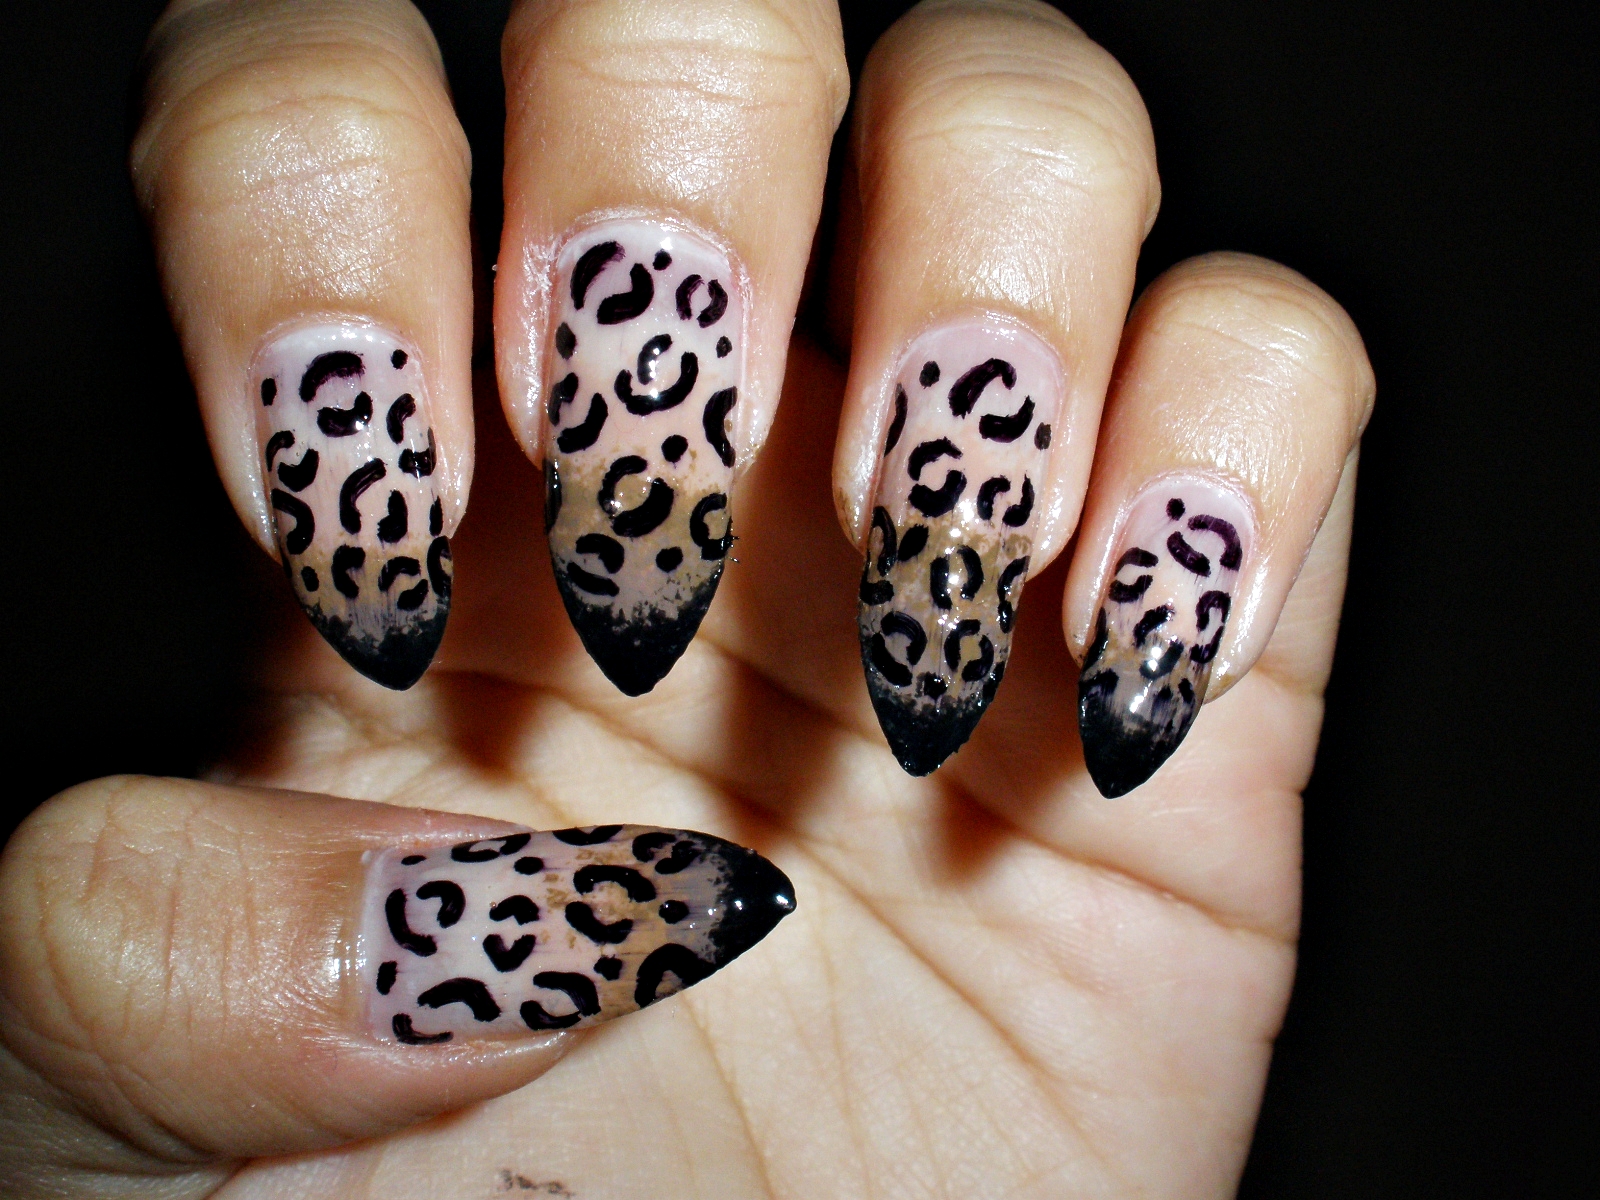 3. Cheetah Nail Designs for Short Nails on Pinterest - wide 7